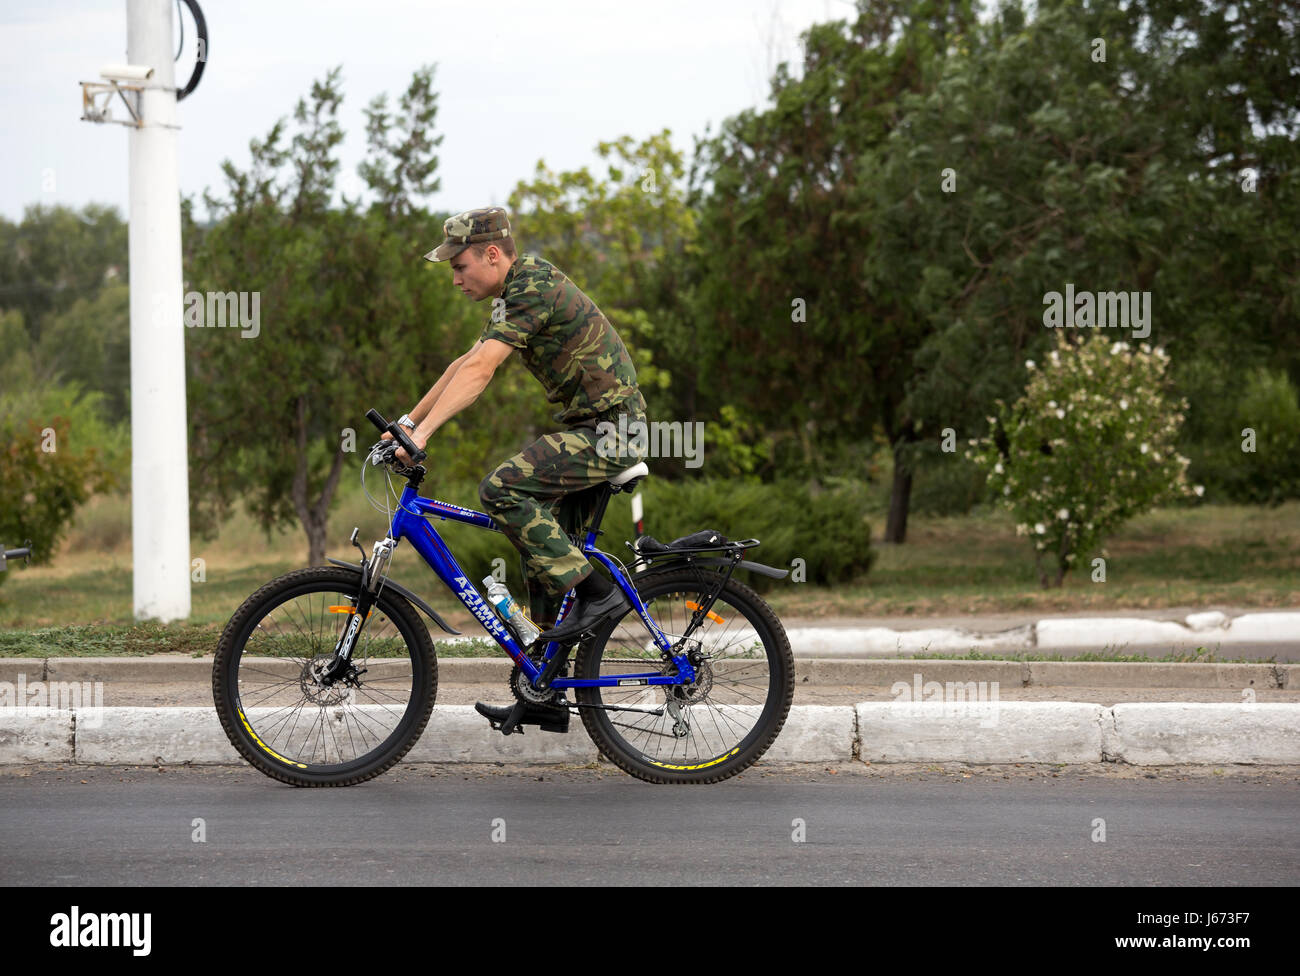 Bender, Moldova, soldier on bicycle Stock Photo